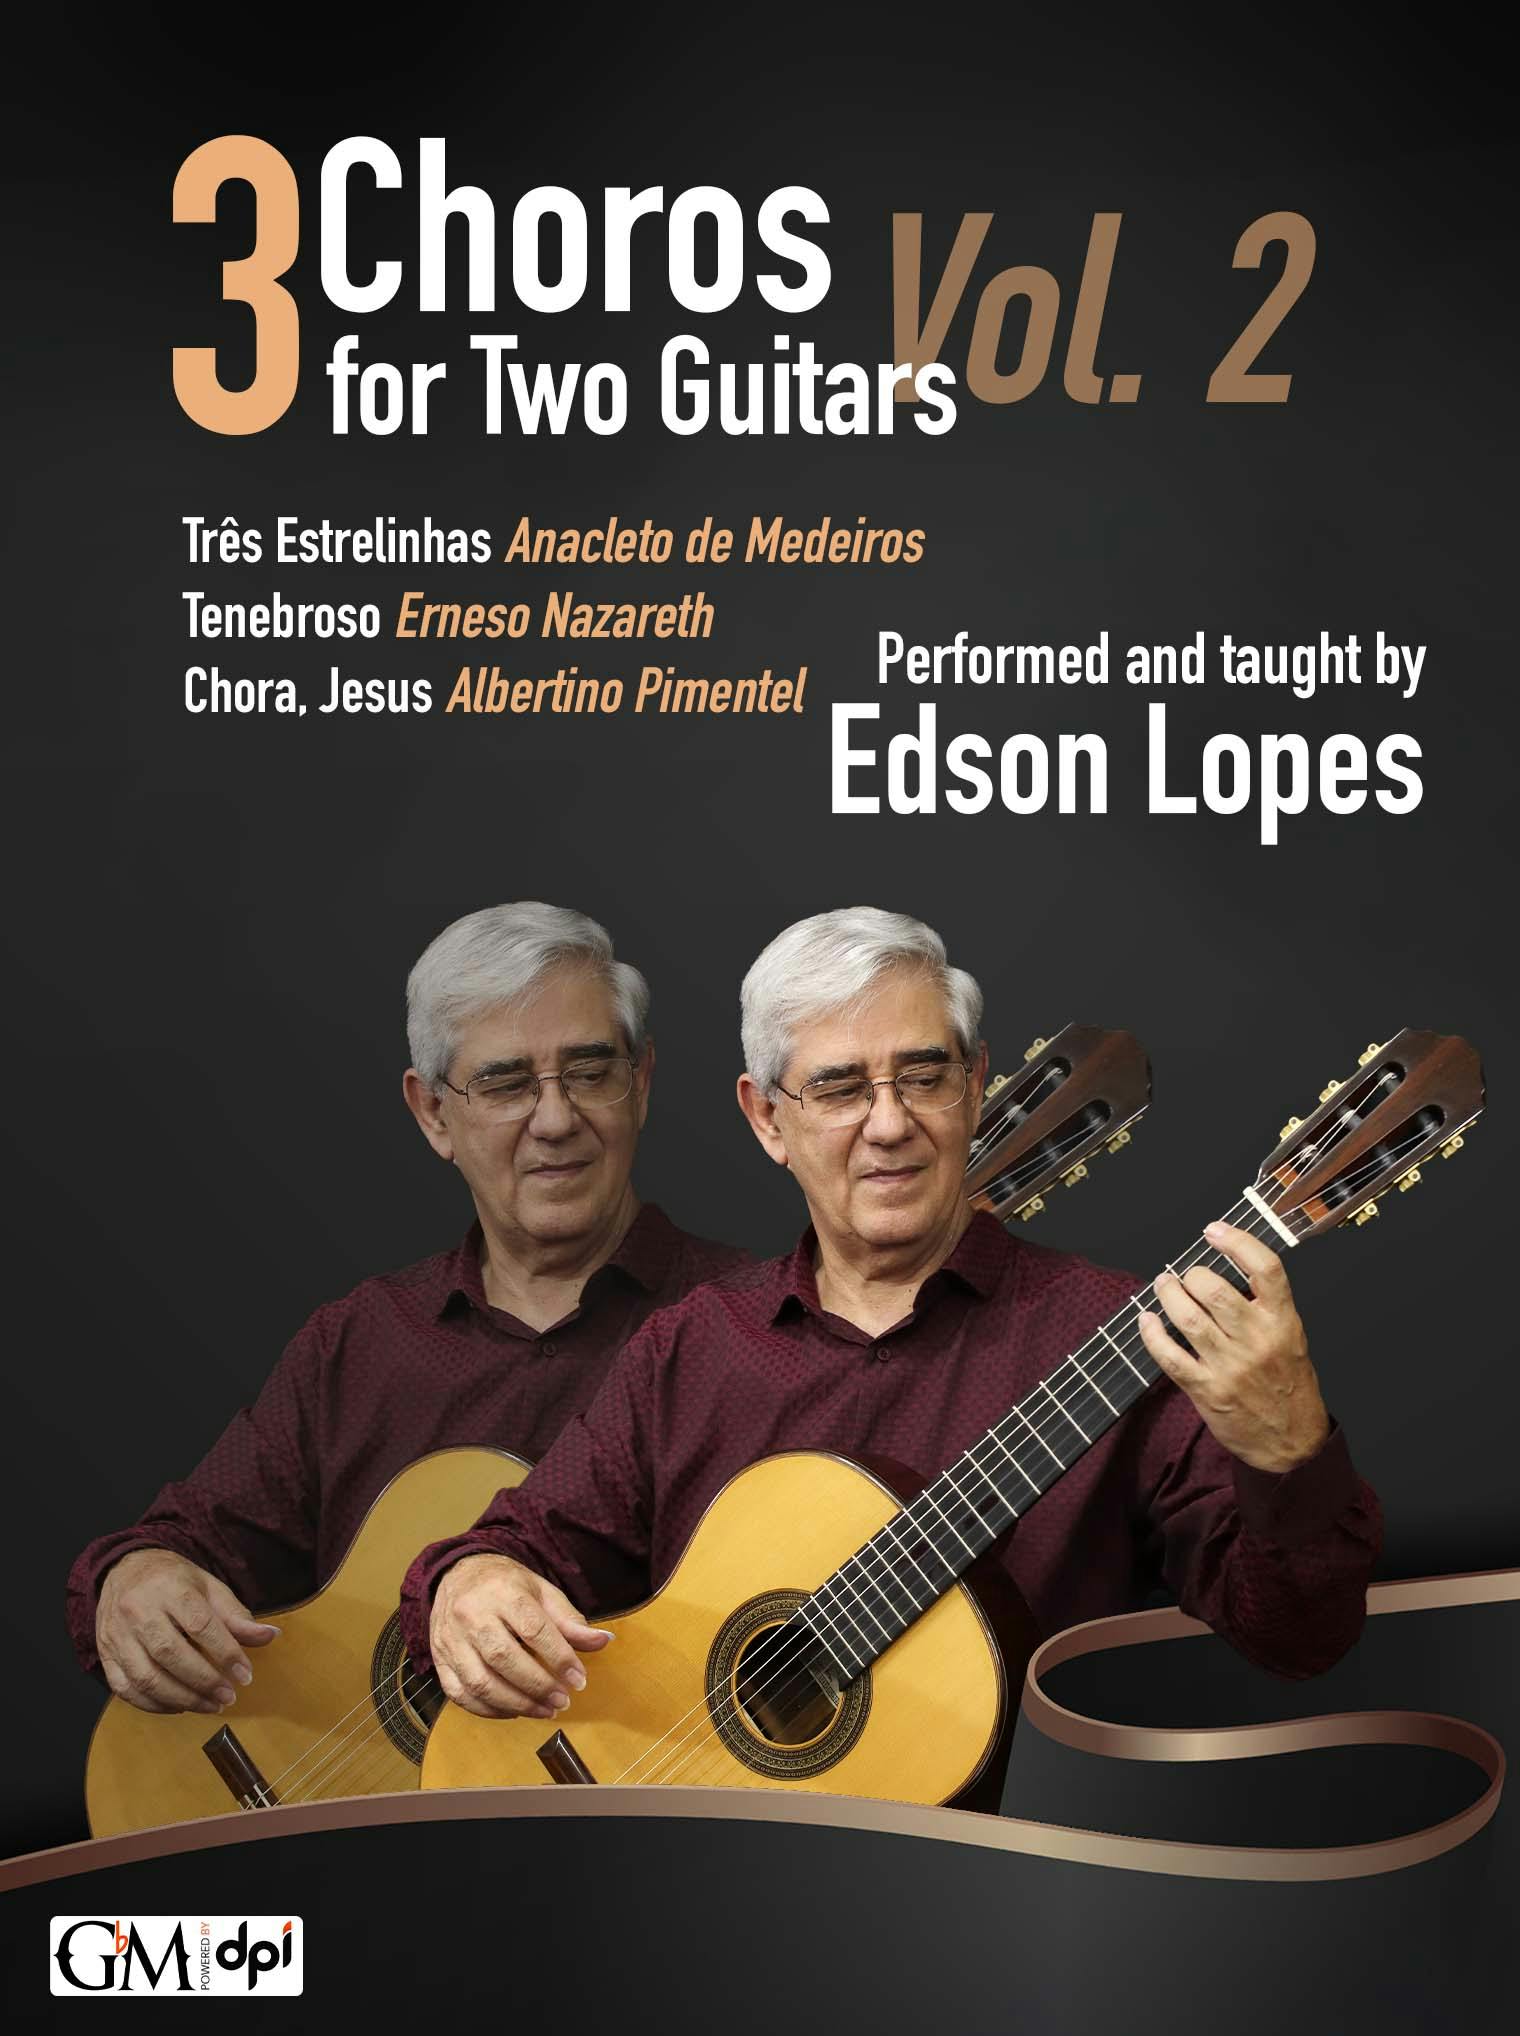 3 Choros for Two Guitars (Vol. 2) cover